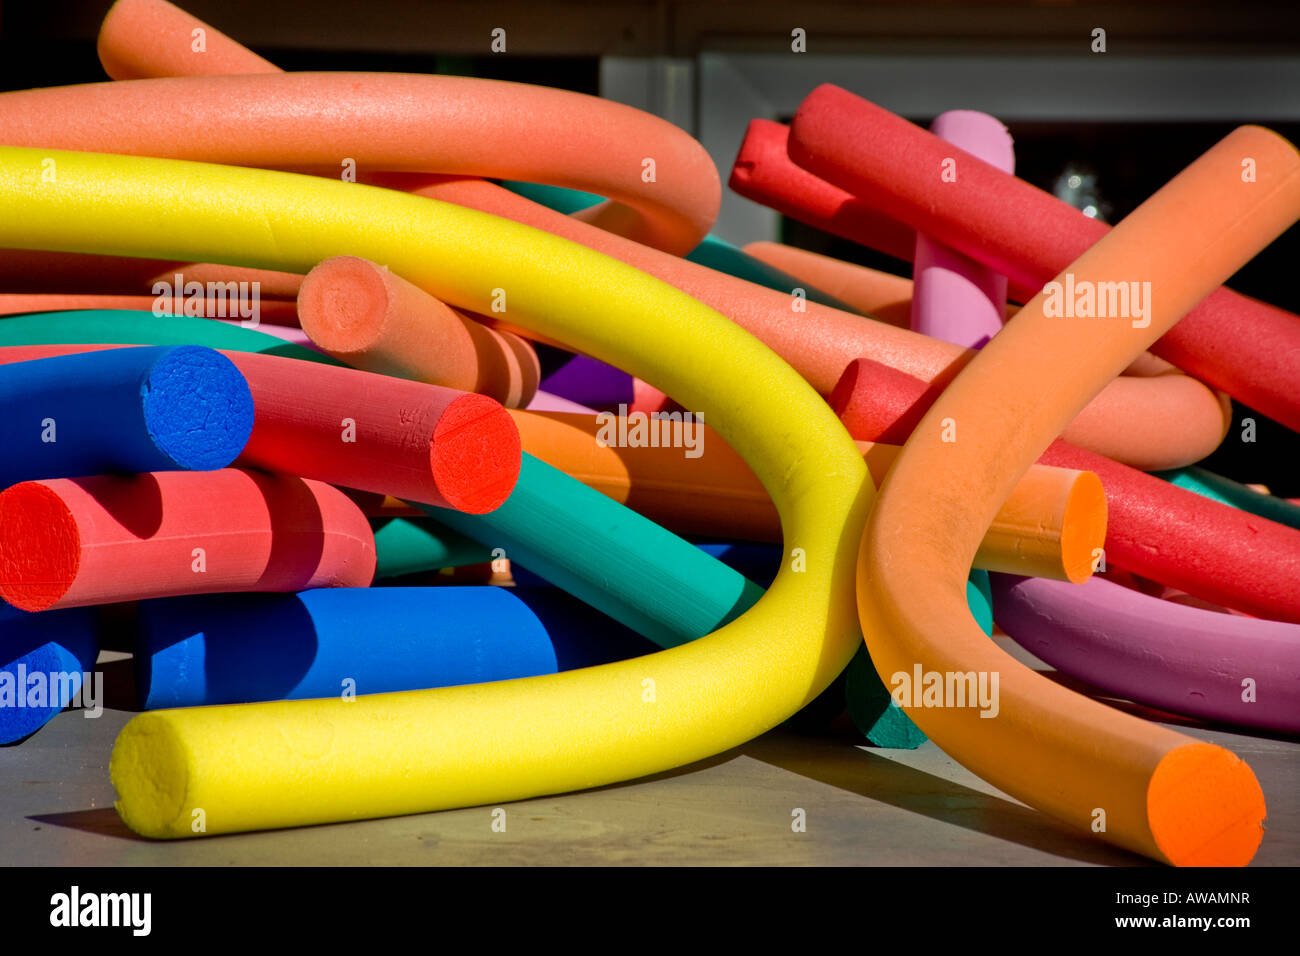 Coloful foam rubber swimming pool floats lie in a bright tangle Stock Photo